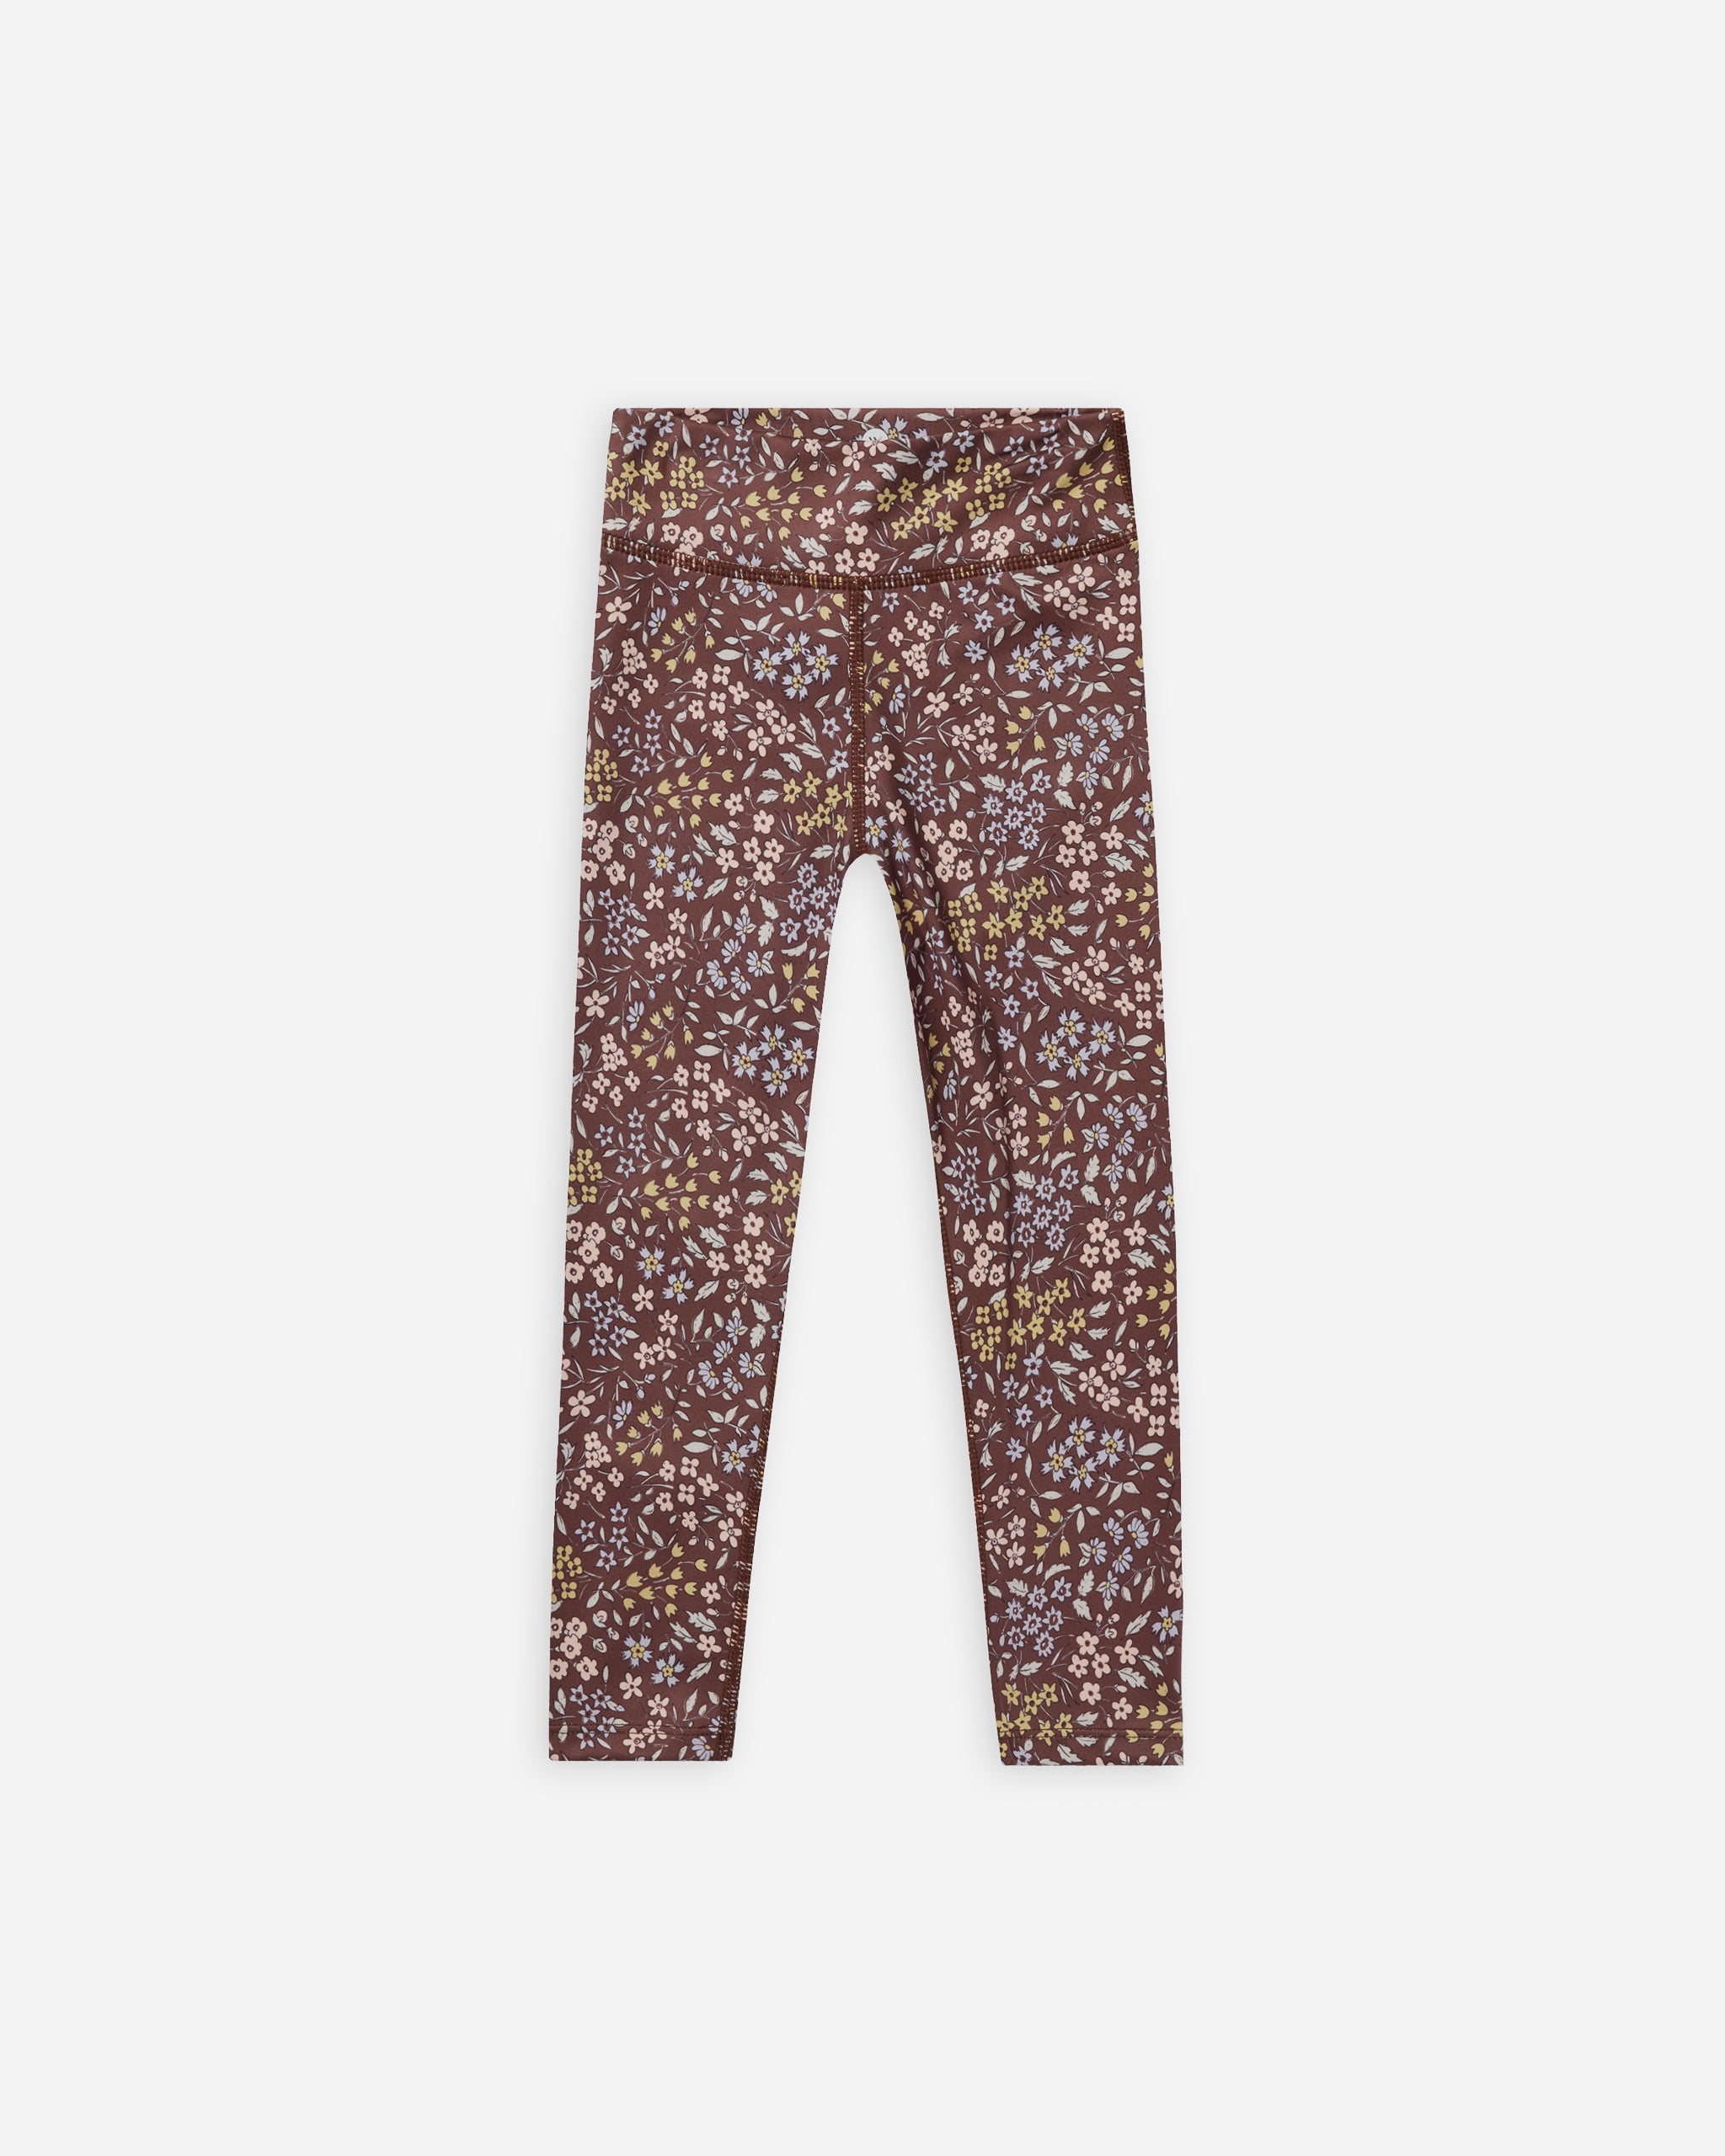 Legging | Rustic Floral - Rylee + Cru | Kids Clothes | Trendy Baby Clothes | Modern Infant Outfits |